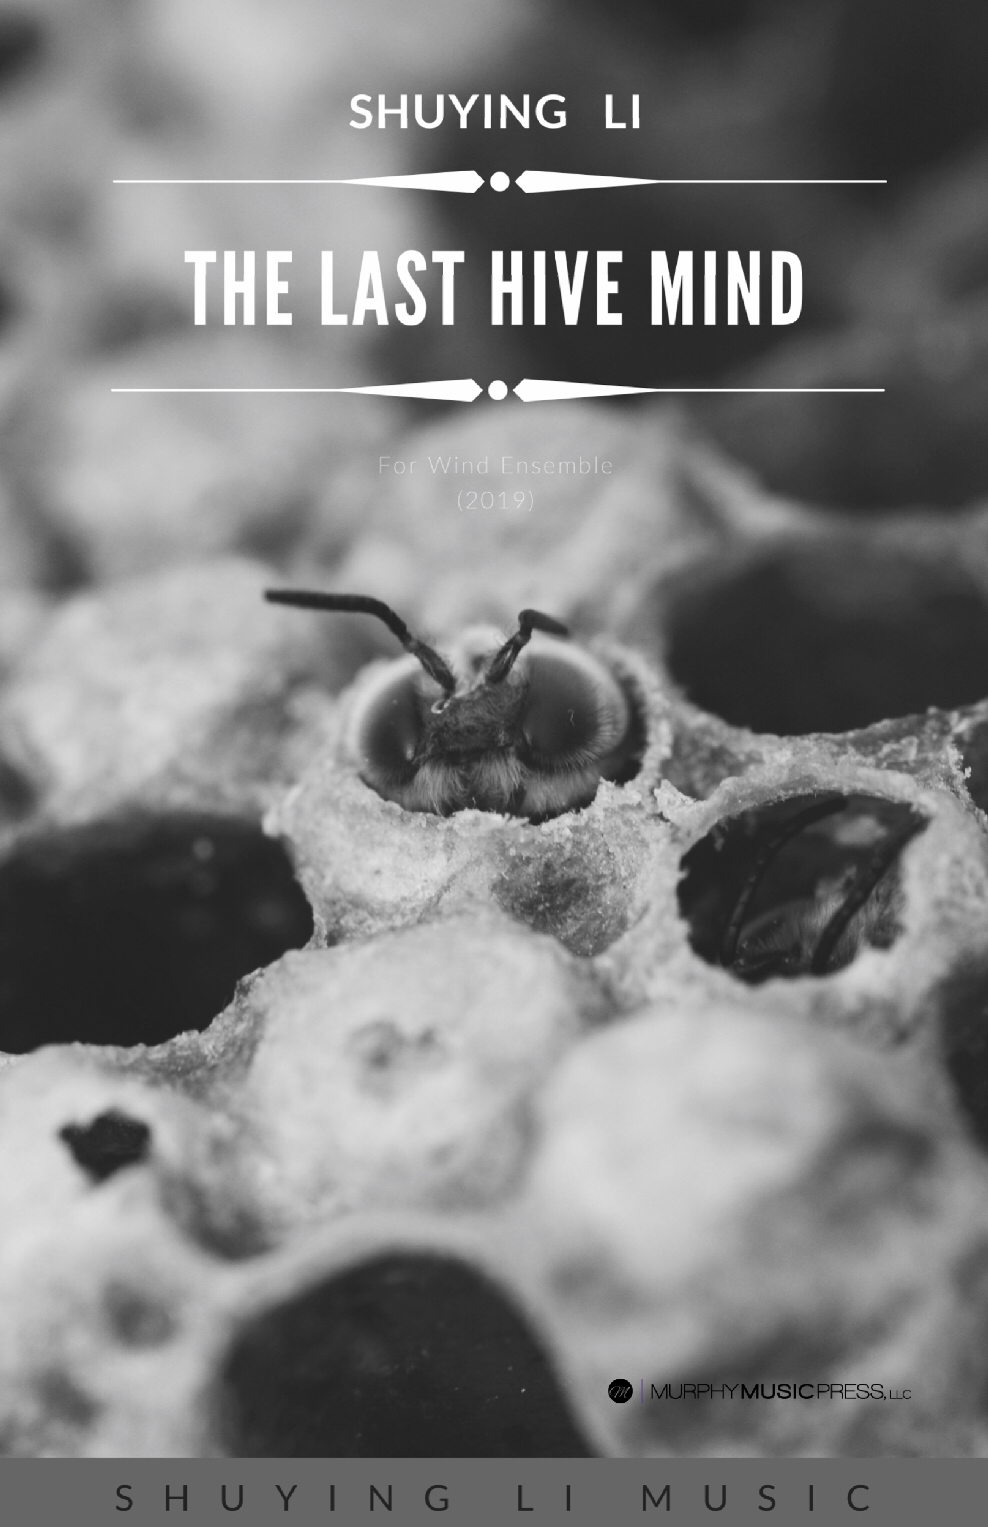 The Last Hivemind (Score Only) by Shuying Li